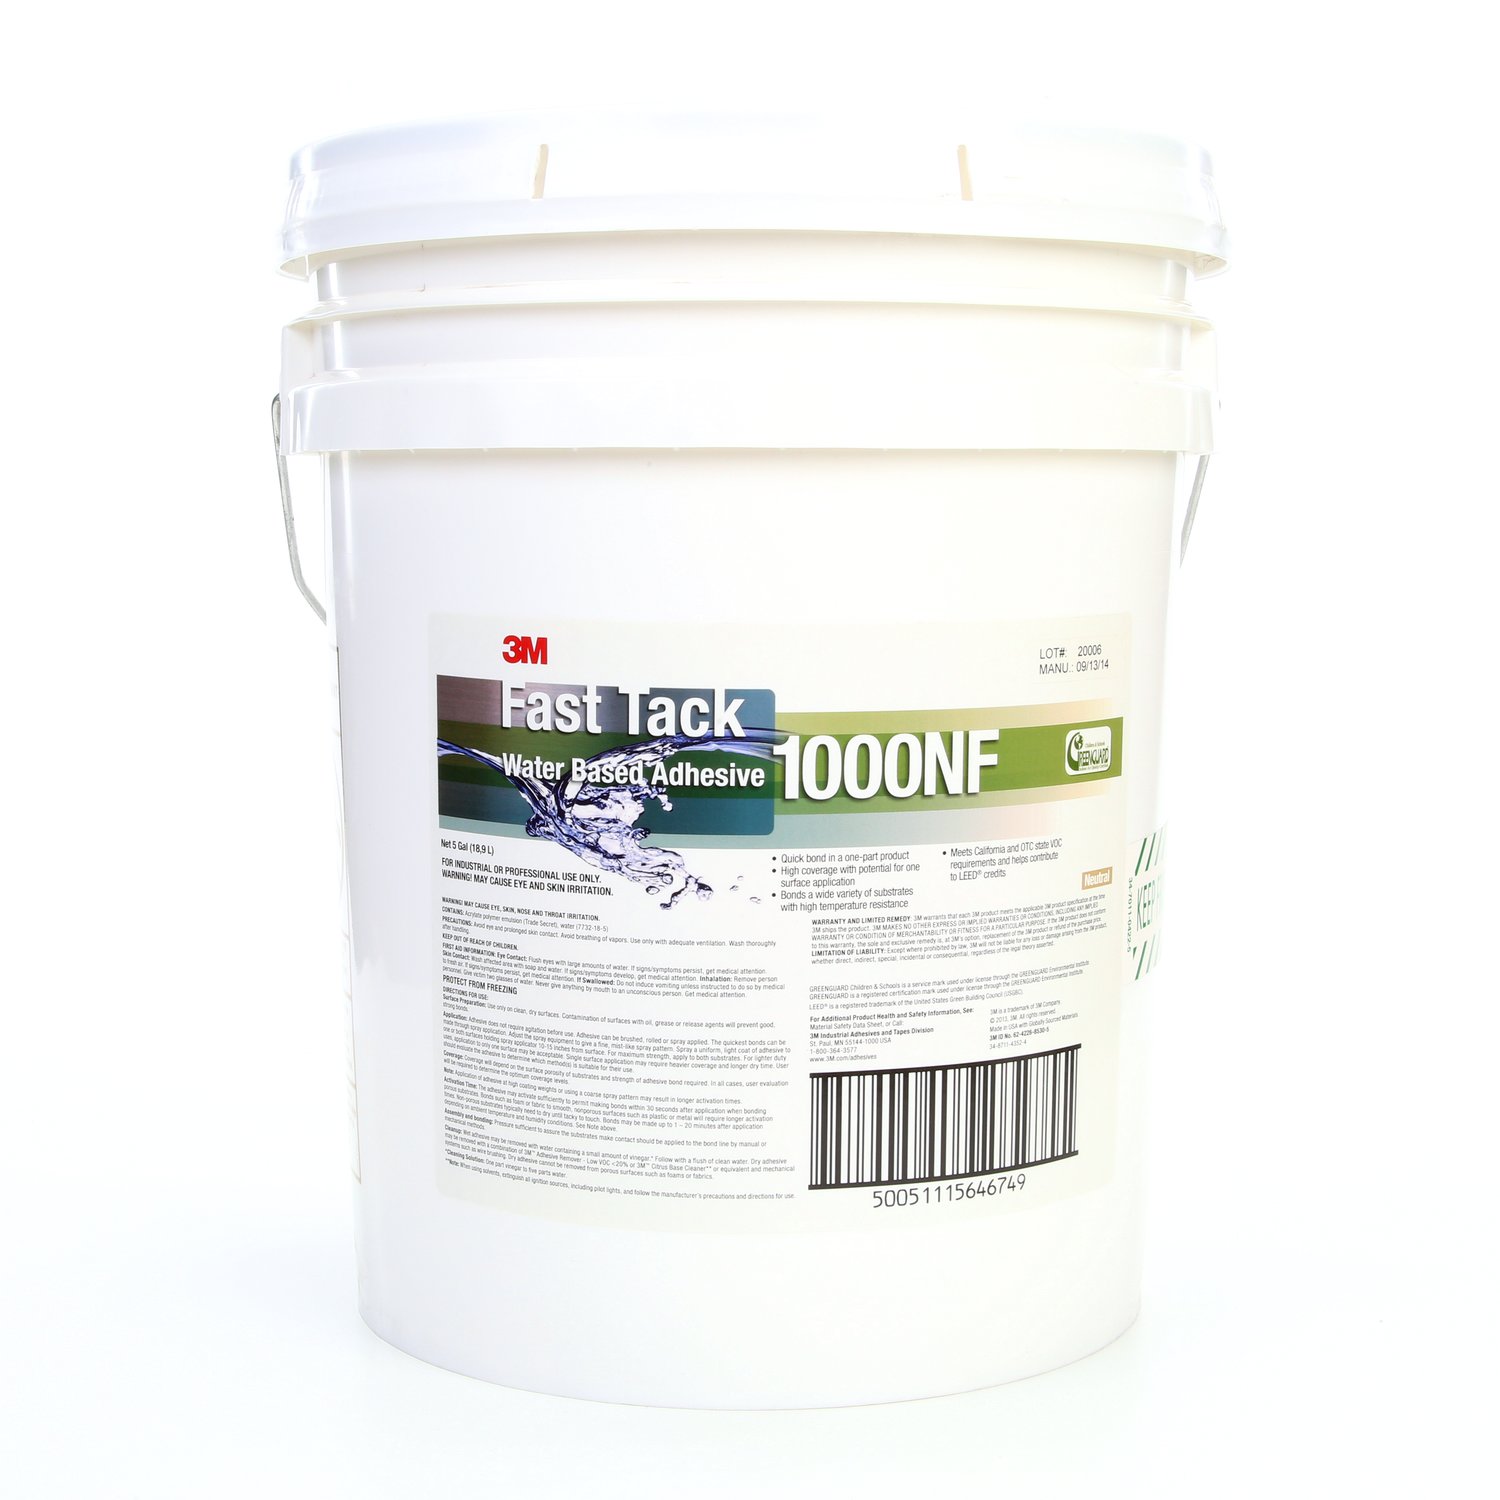 7100025154 - 3M Fast Tack Water Based Adhesive 1000NF, Neutral, 5 Gallon, (Pail) 1
Can/Drum